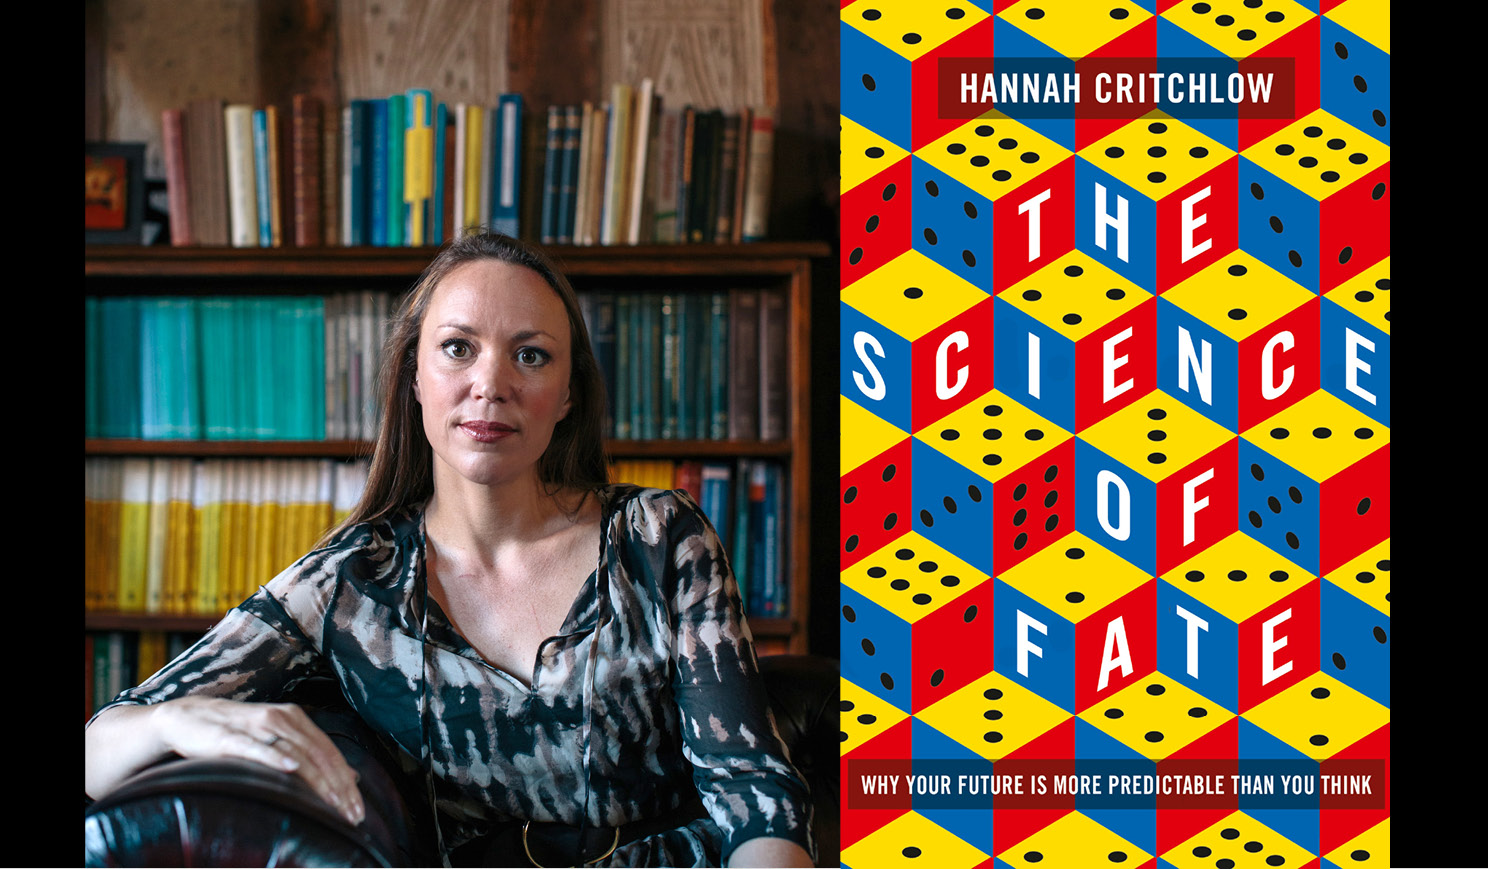 Hannah Critchlow's headshot alongside the cover of her book The Science of Fate